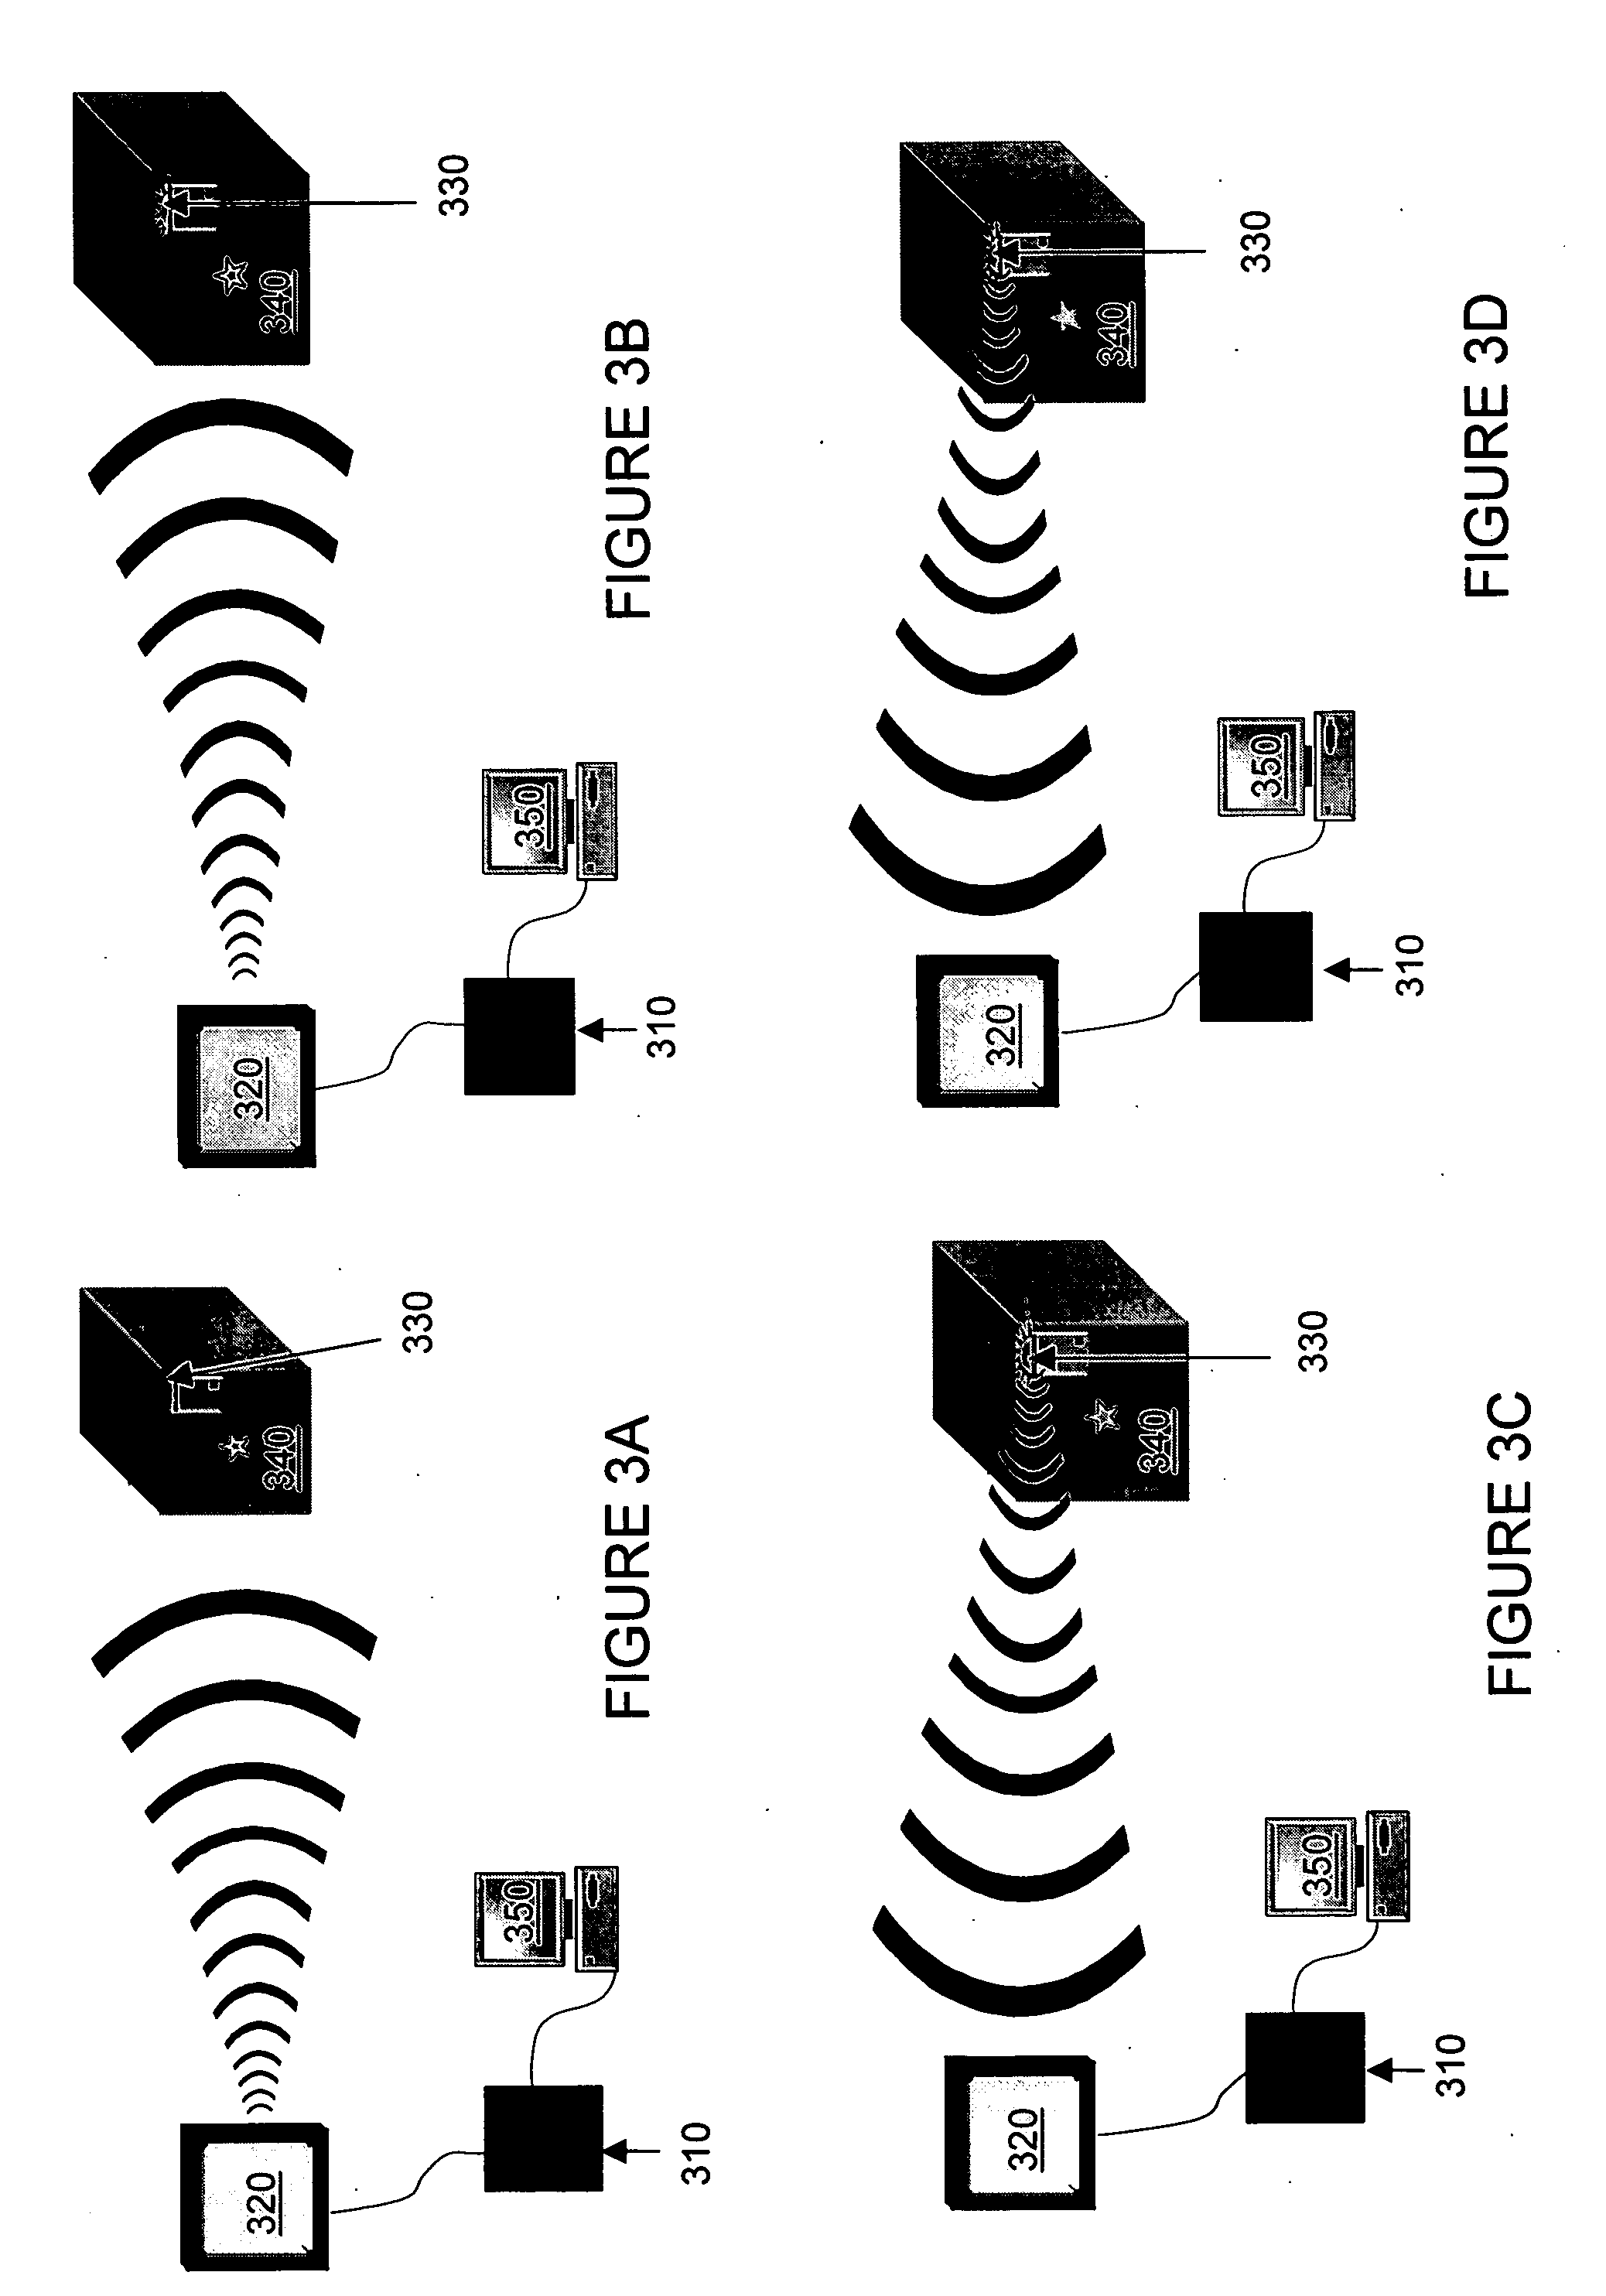 Radio frequency identification application system